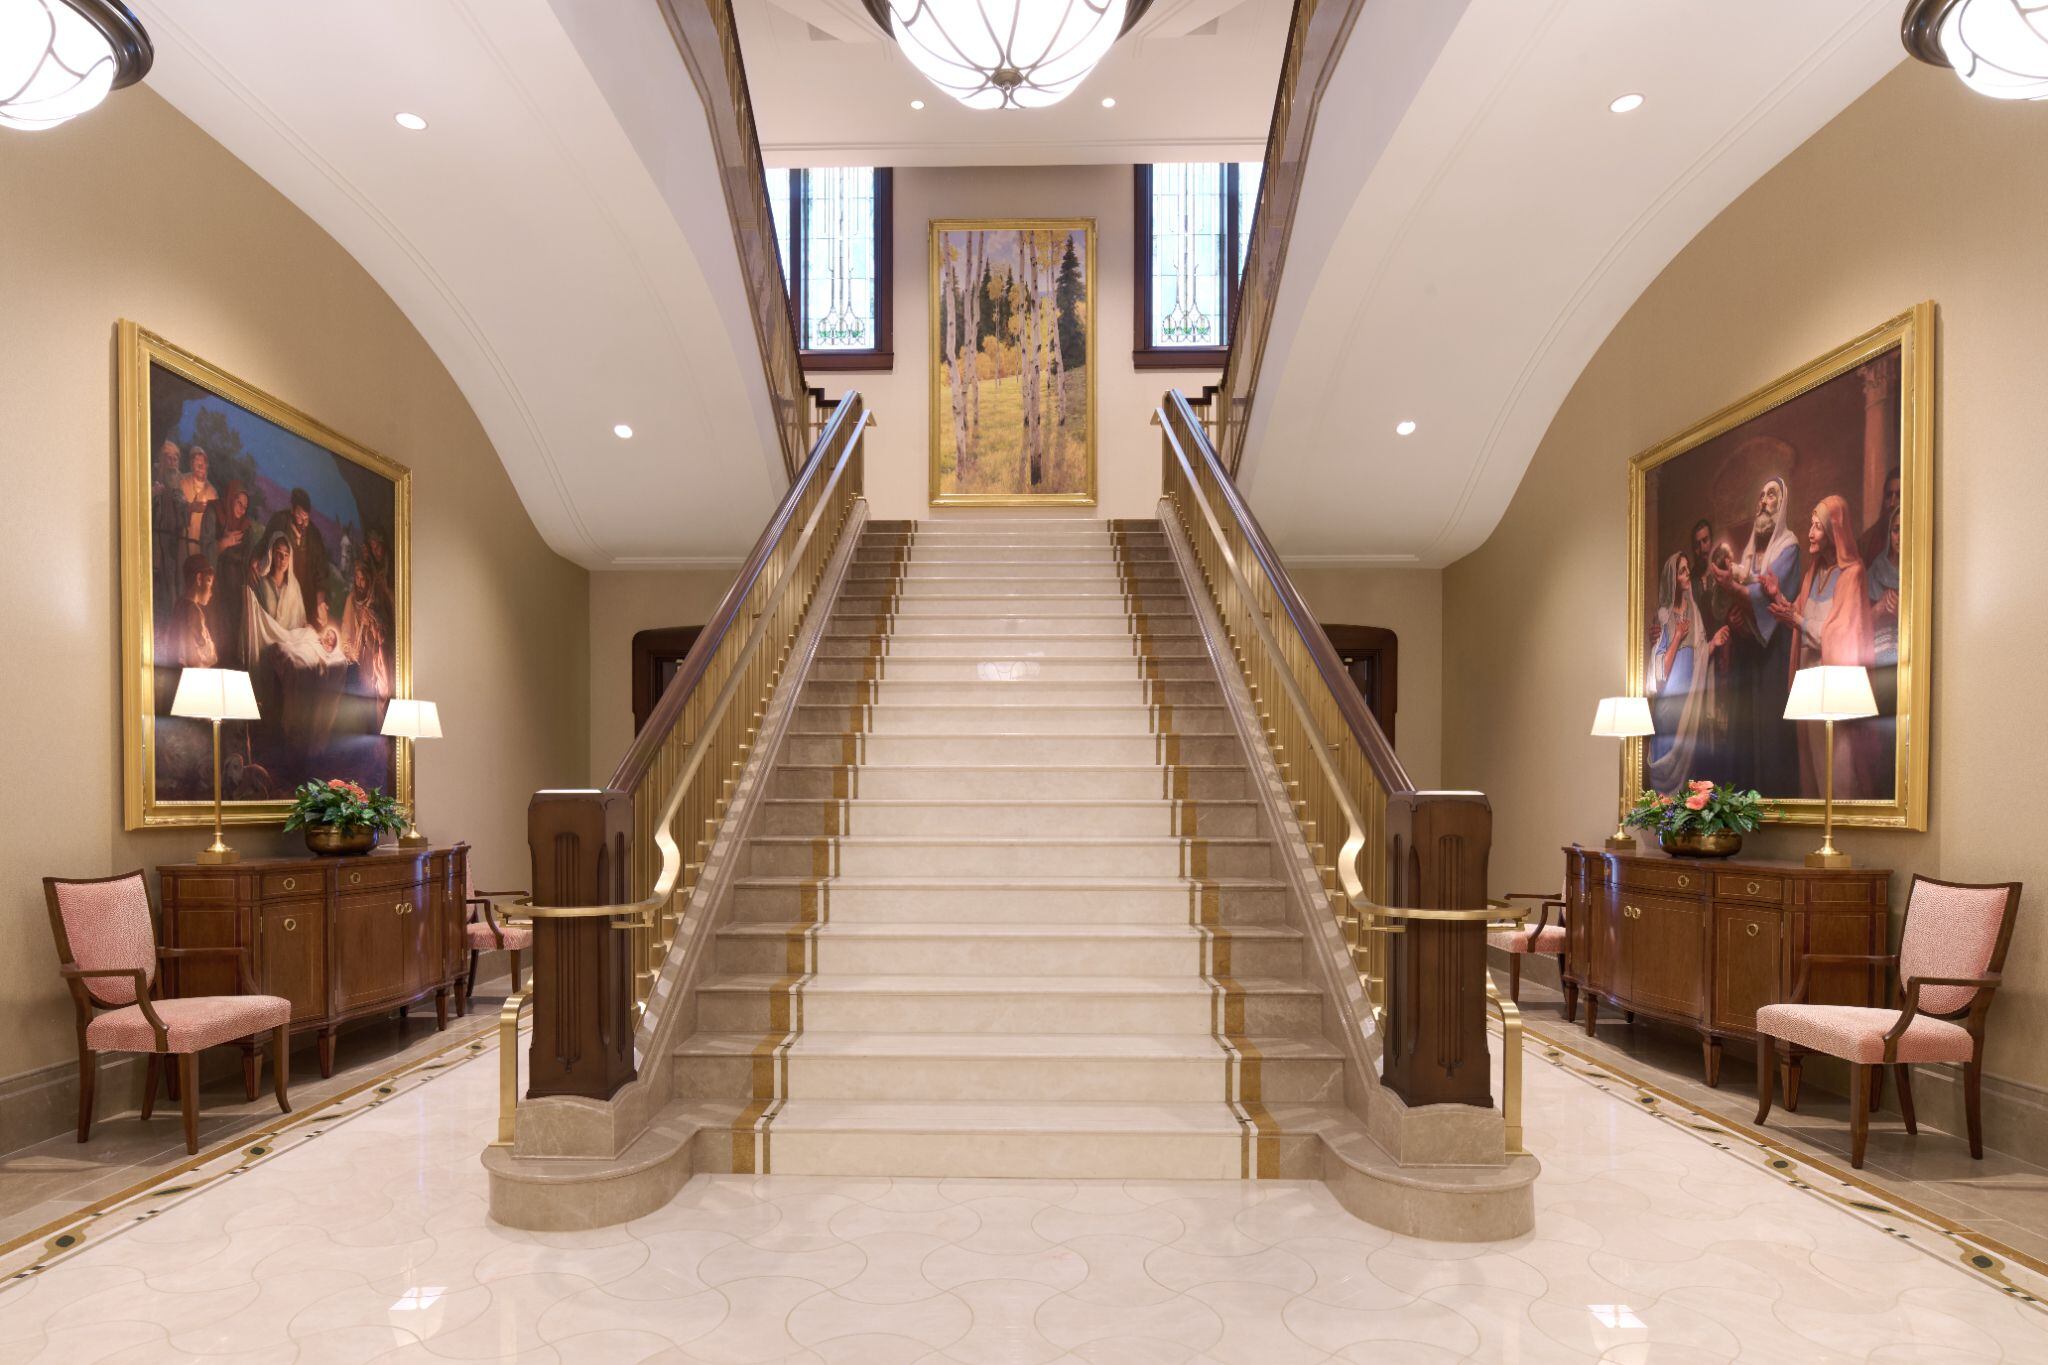 (The Church of Jesus Christ of Latter-day Saints) The main staircase in the Layton Utah Temple.